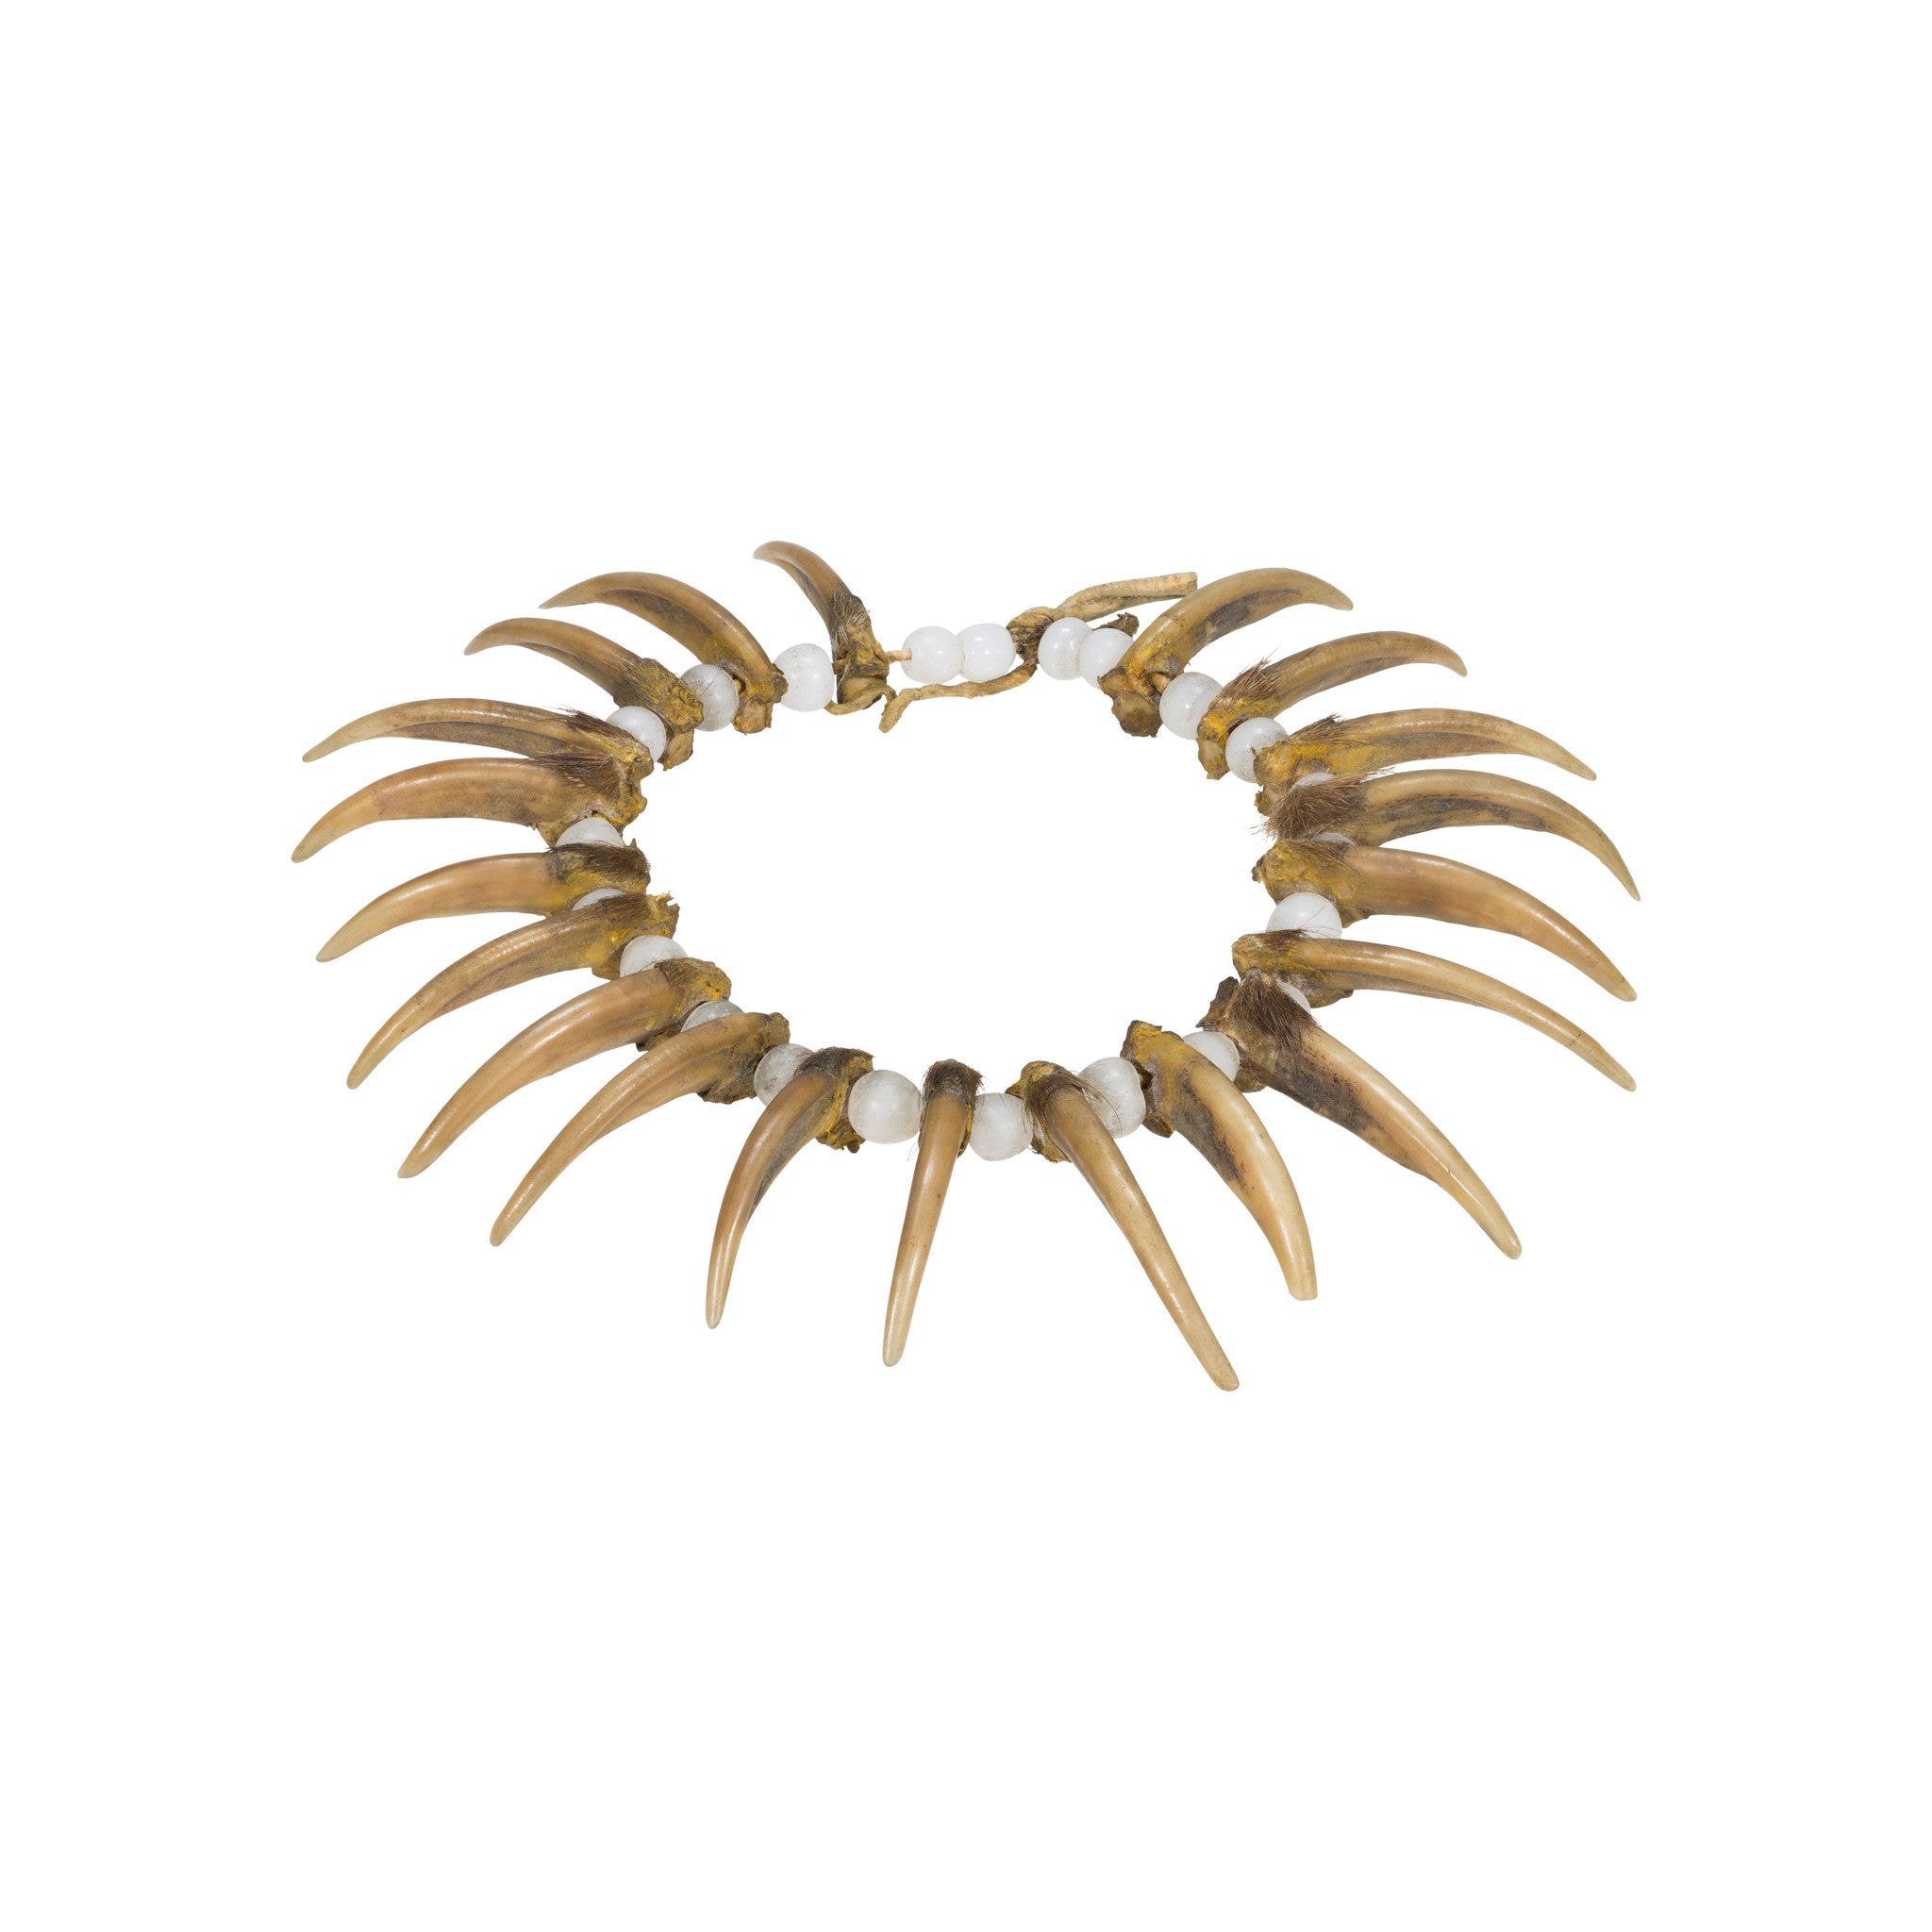 Sioux Warrior's Badger Claw Choker